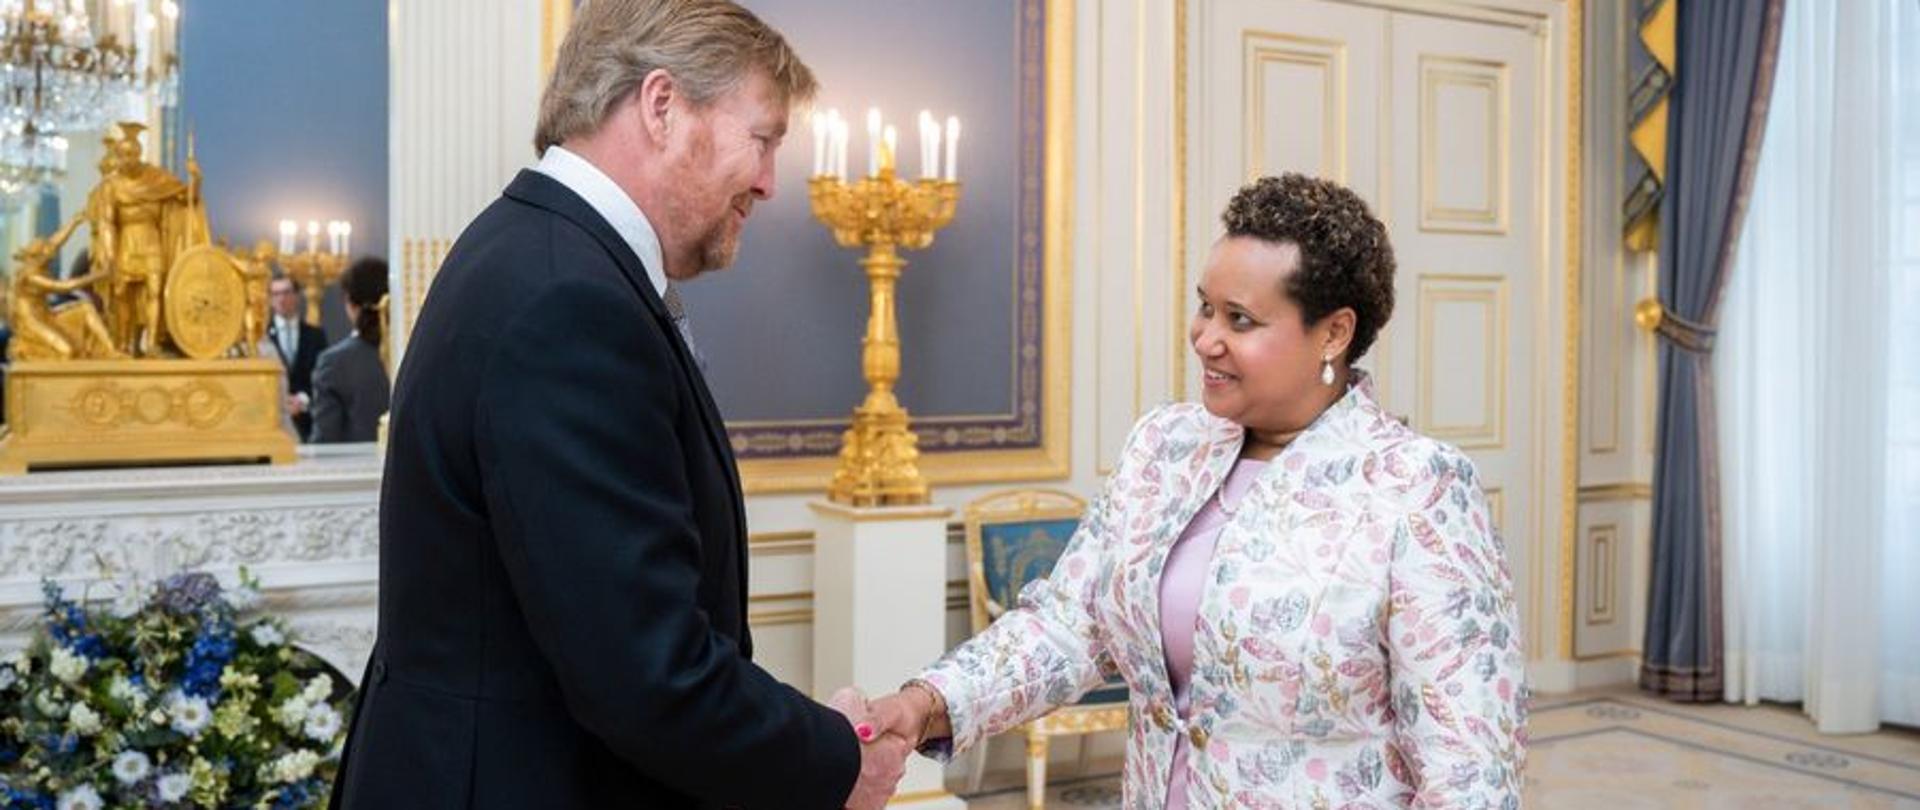 Ambassador of the Republic of Poland to the Kingdom of the Netherlands, Margareta Kassangana presents the Letters of Credentials to King Willem-Alexander